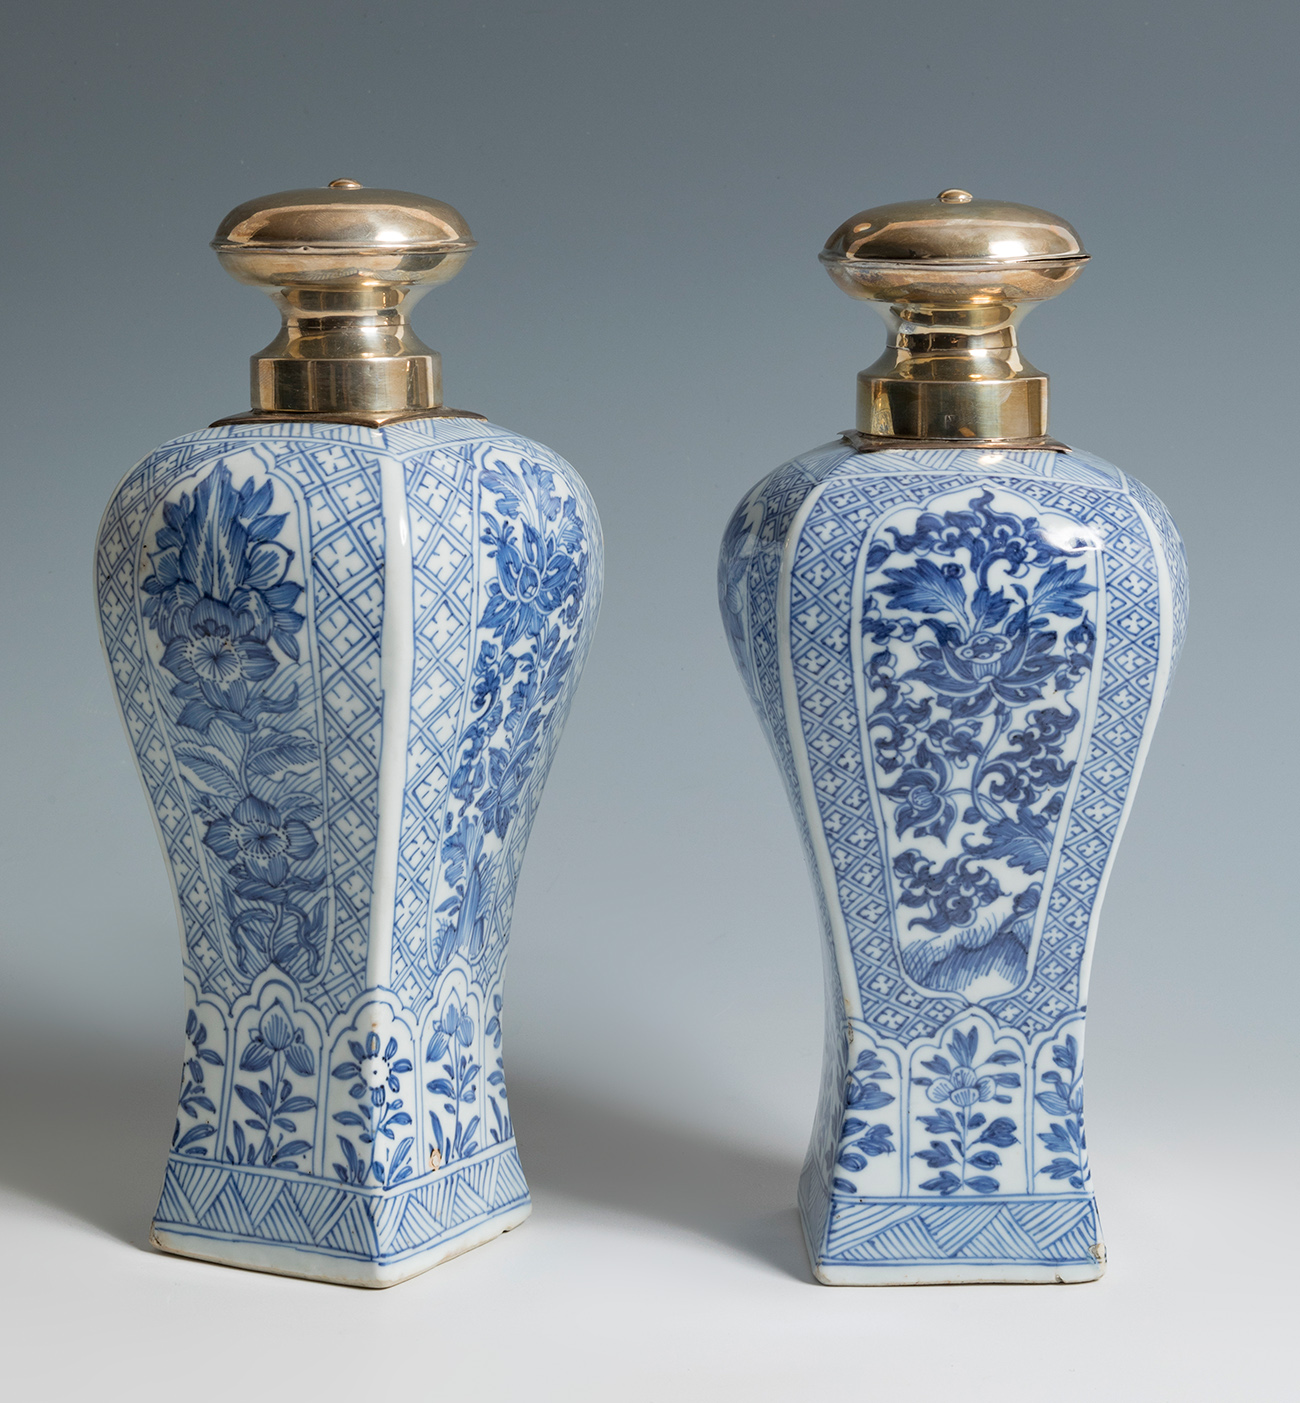 Pair of Chinese vases. Qing dynasty, Kangxi period, 18th century.Hand-painted porcelain.Size: 26 x